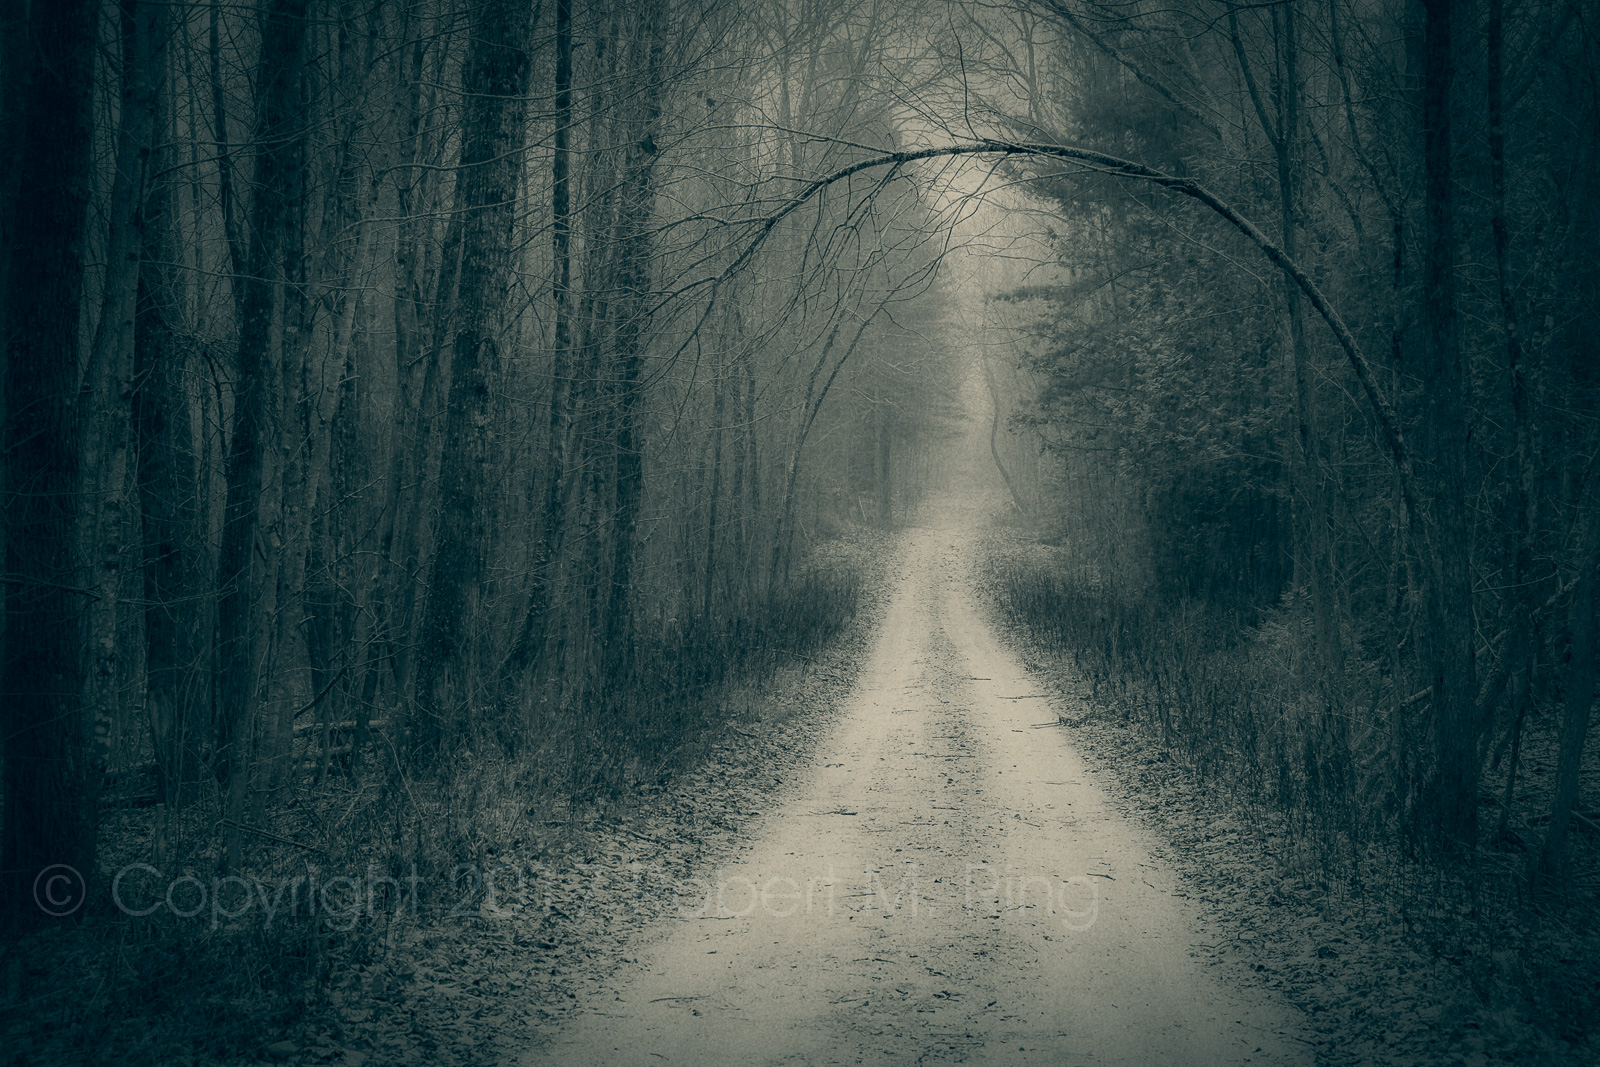 Dark, secluded, road to who knows where...